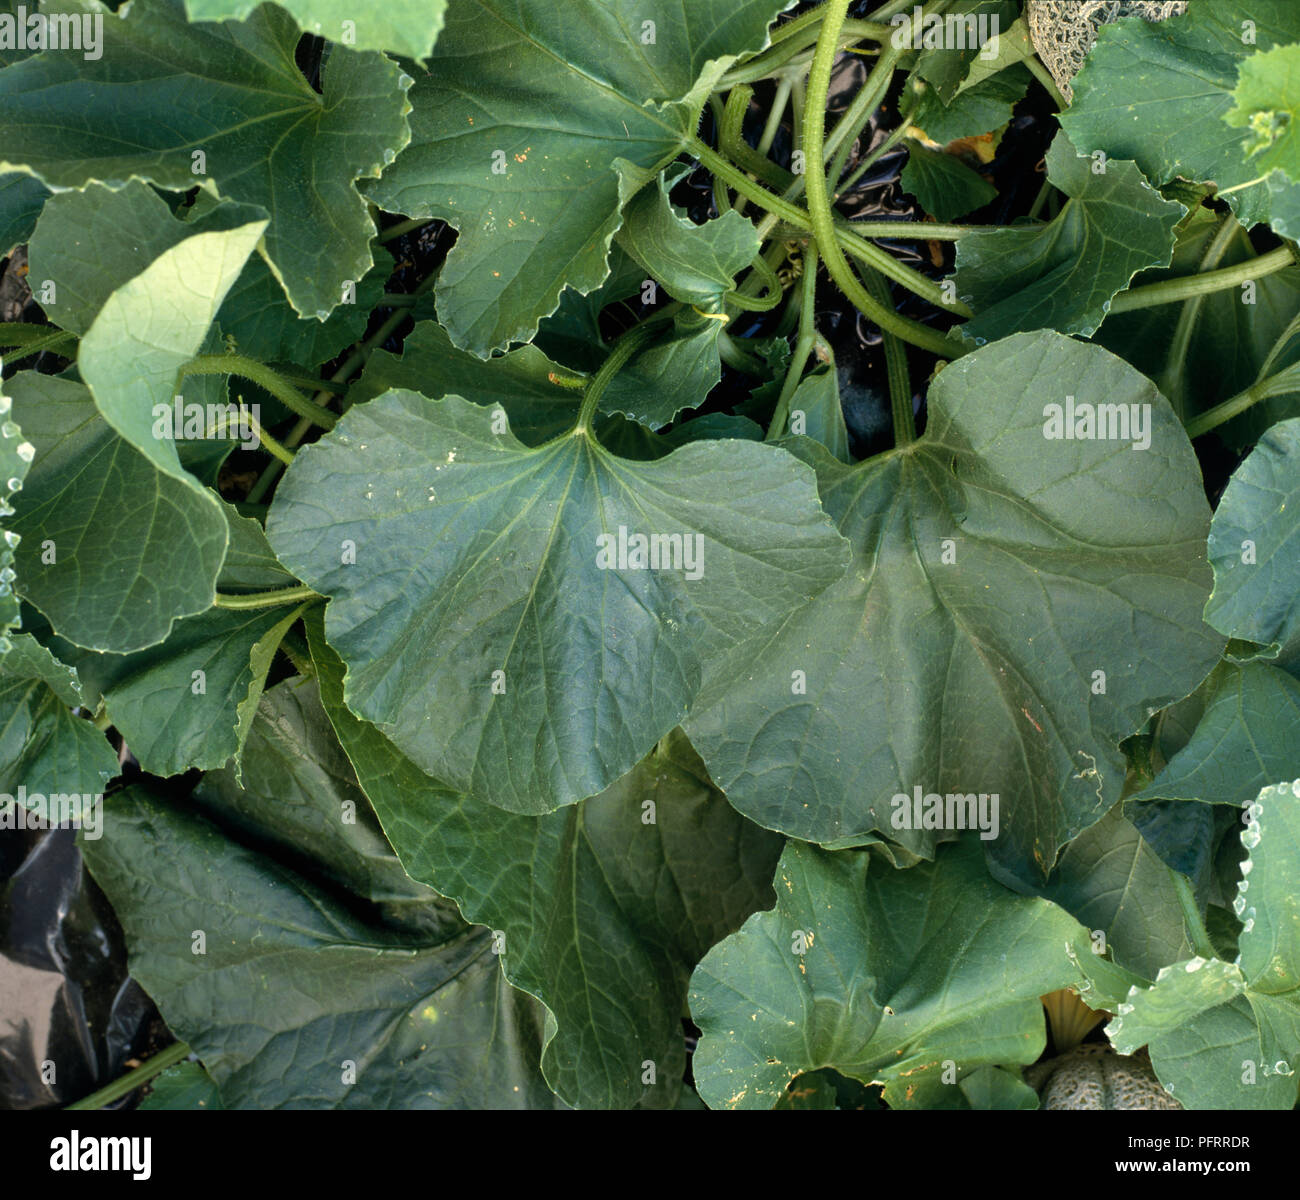 Solanum retroflexum (Sunberry) with large green leaves, close-up Stock Photo